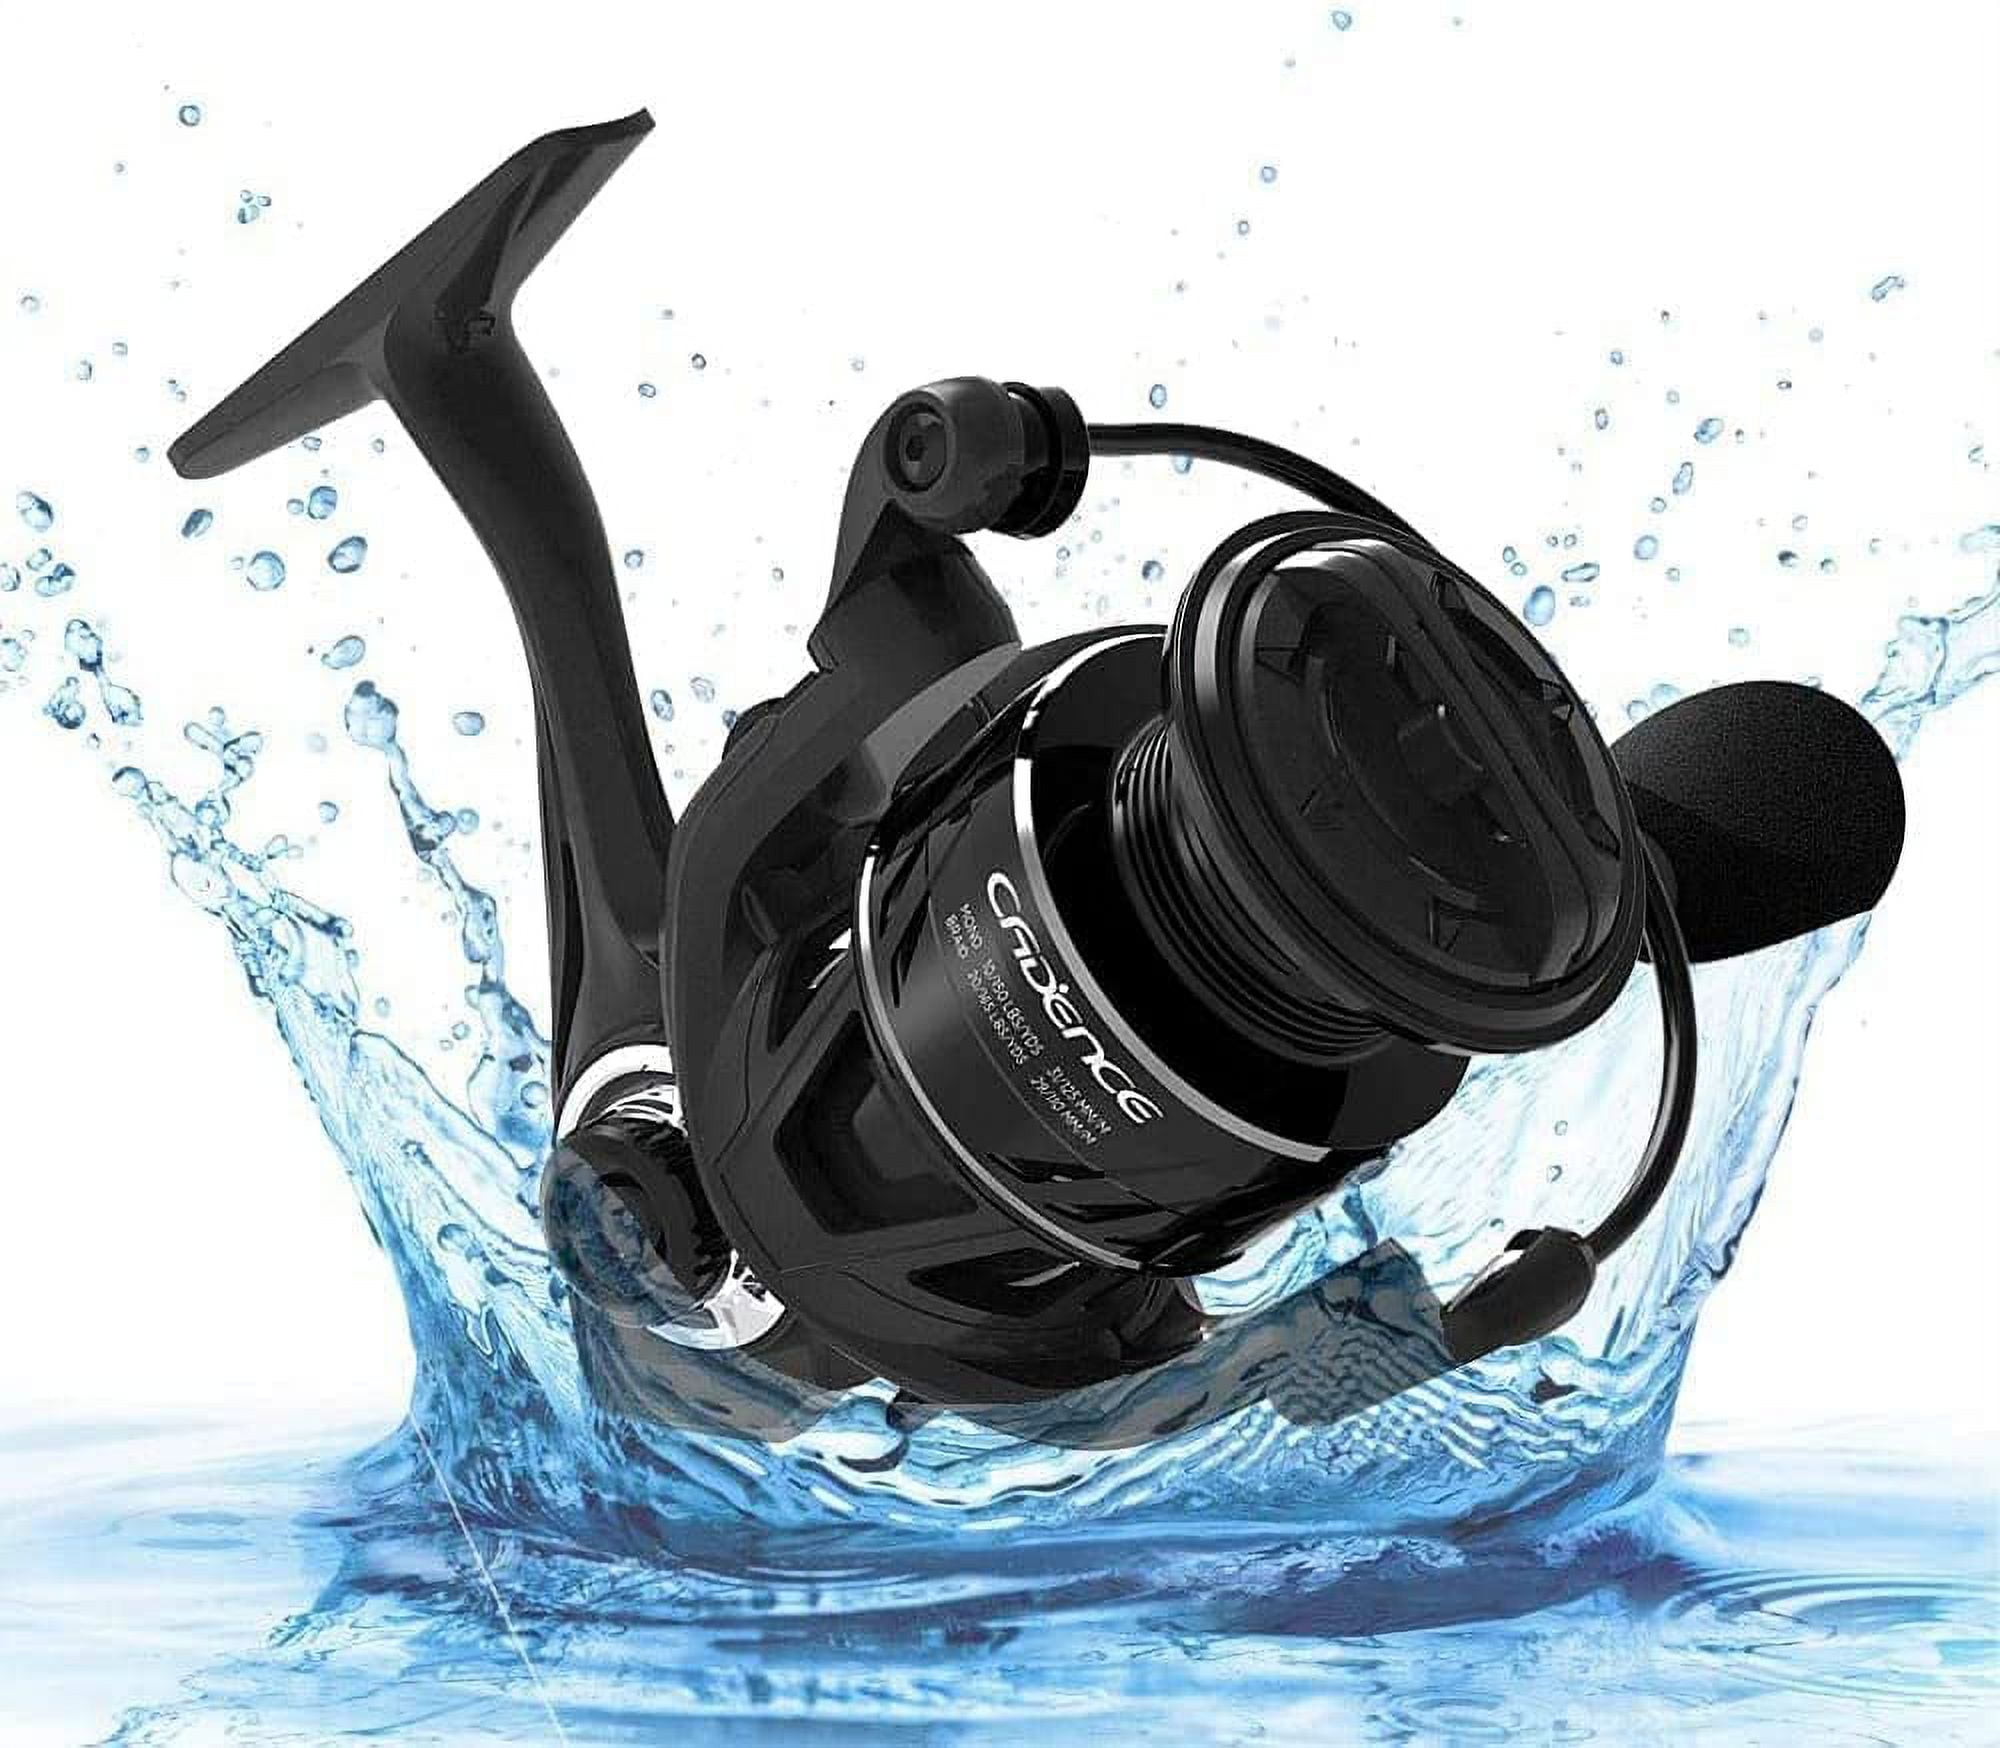 Cadence Spinning Reel,Cs5 Ultralight Carbon Fiber Fishing Reel With 9  Durable & Corrosion Resistant Bearings For Saltwater Or Freshwater,Super  Smooth